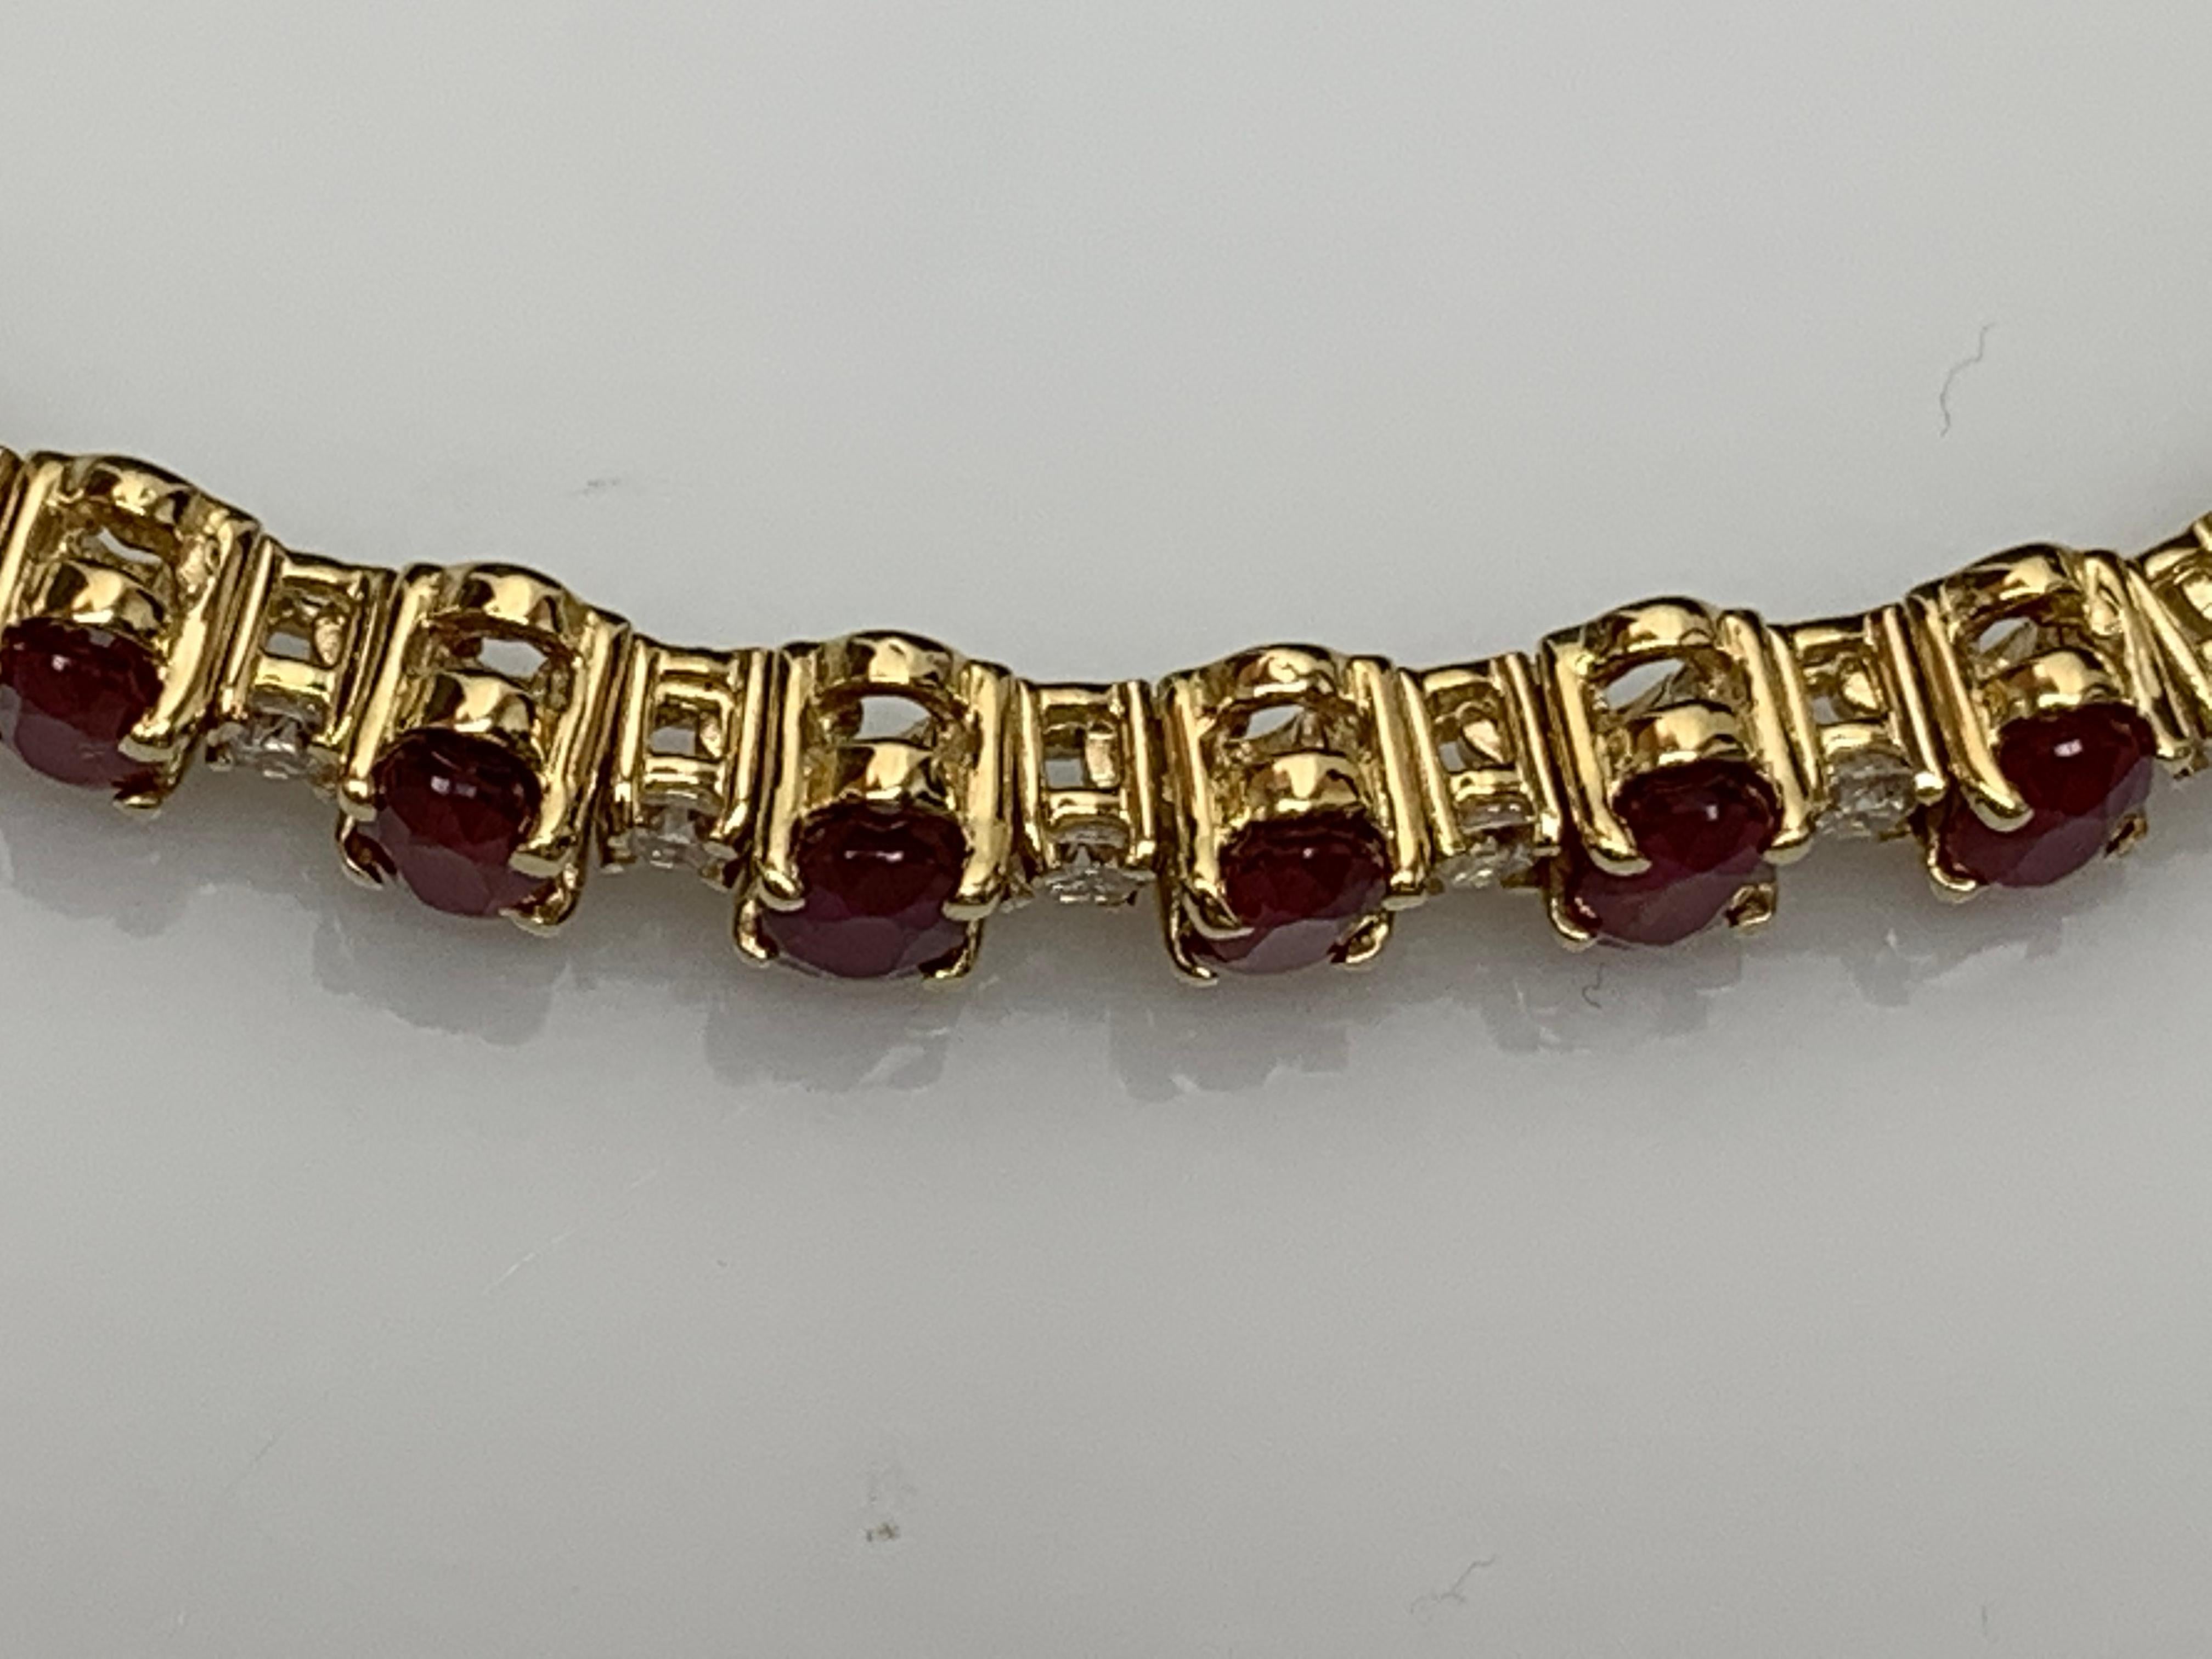 Grandeur 9.27 Carats Oval Cut Ruby and Diamond Bracelet in 14k Yellow Gold For Sale 7